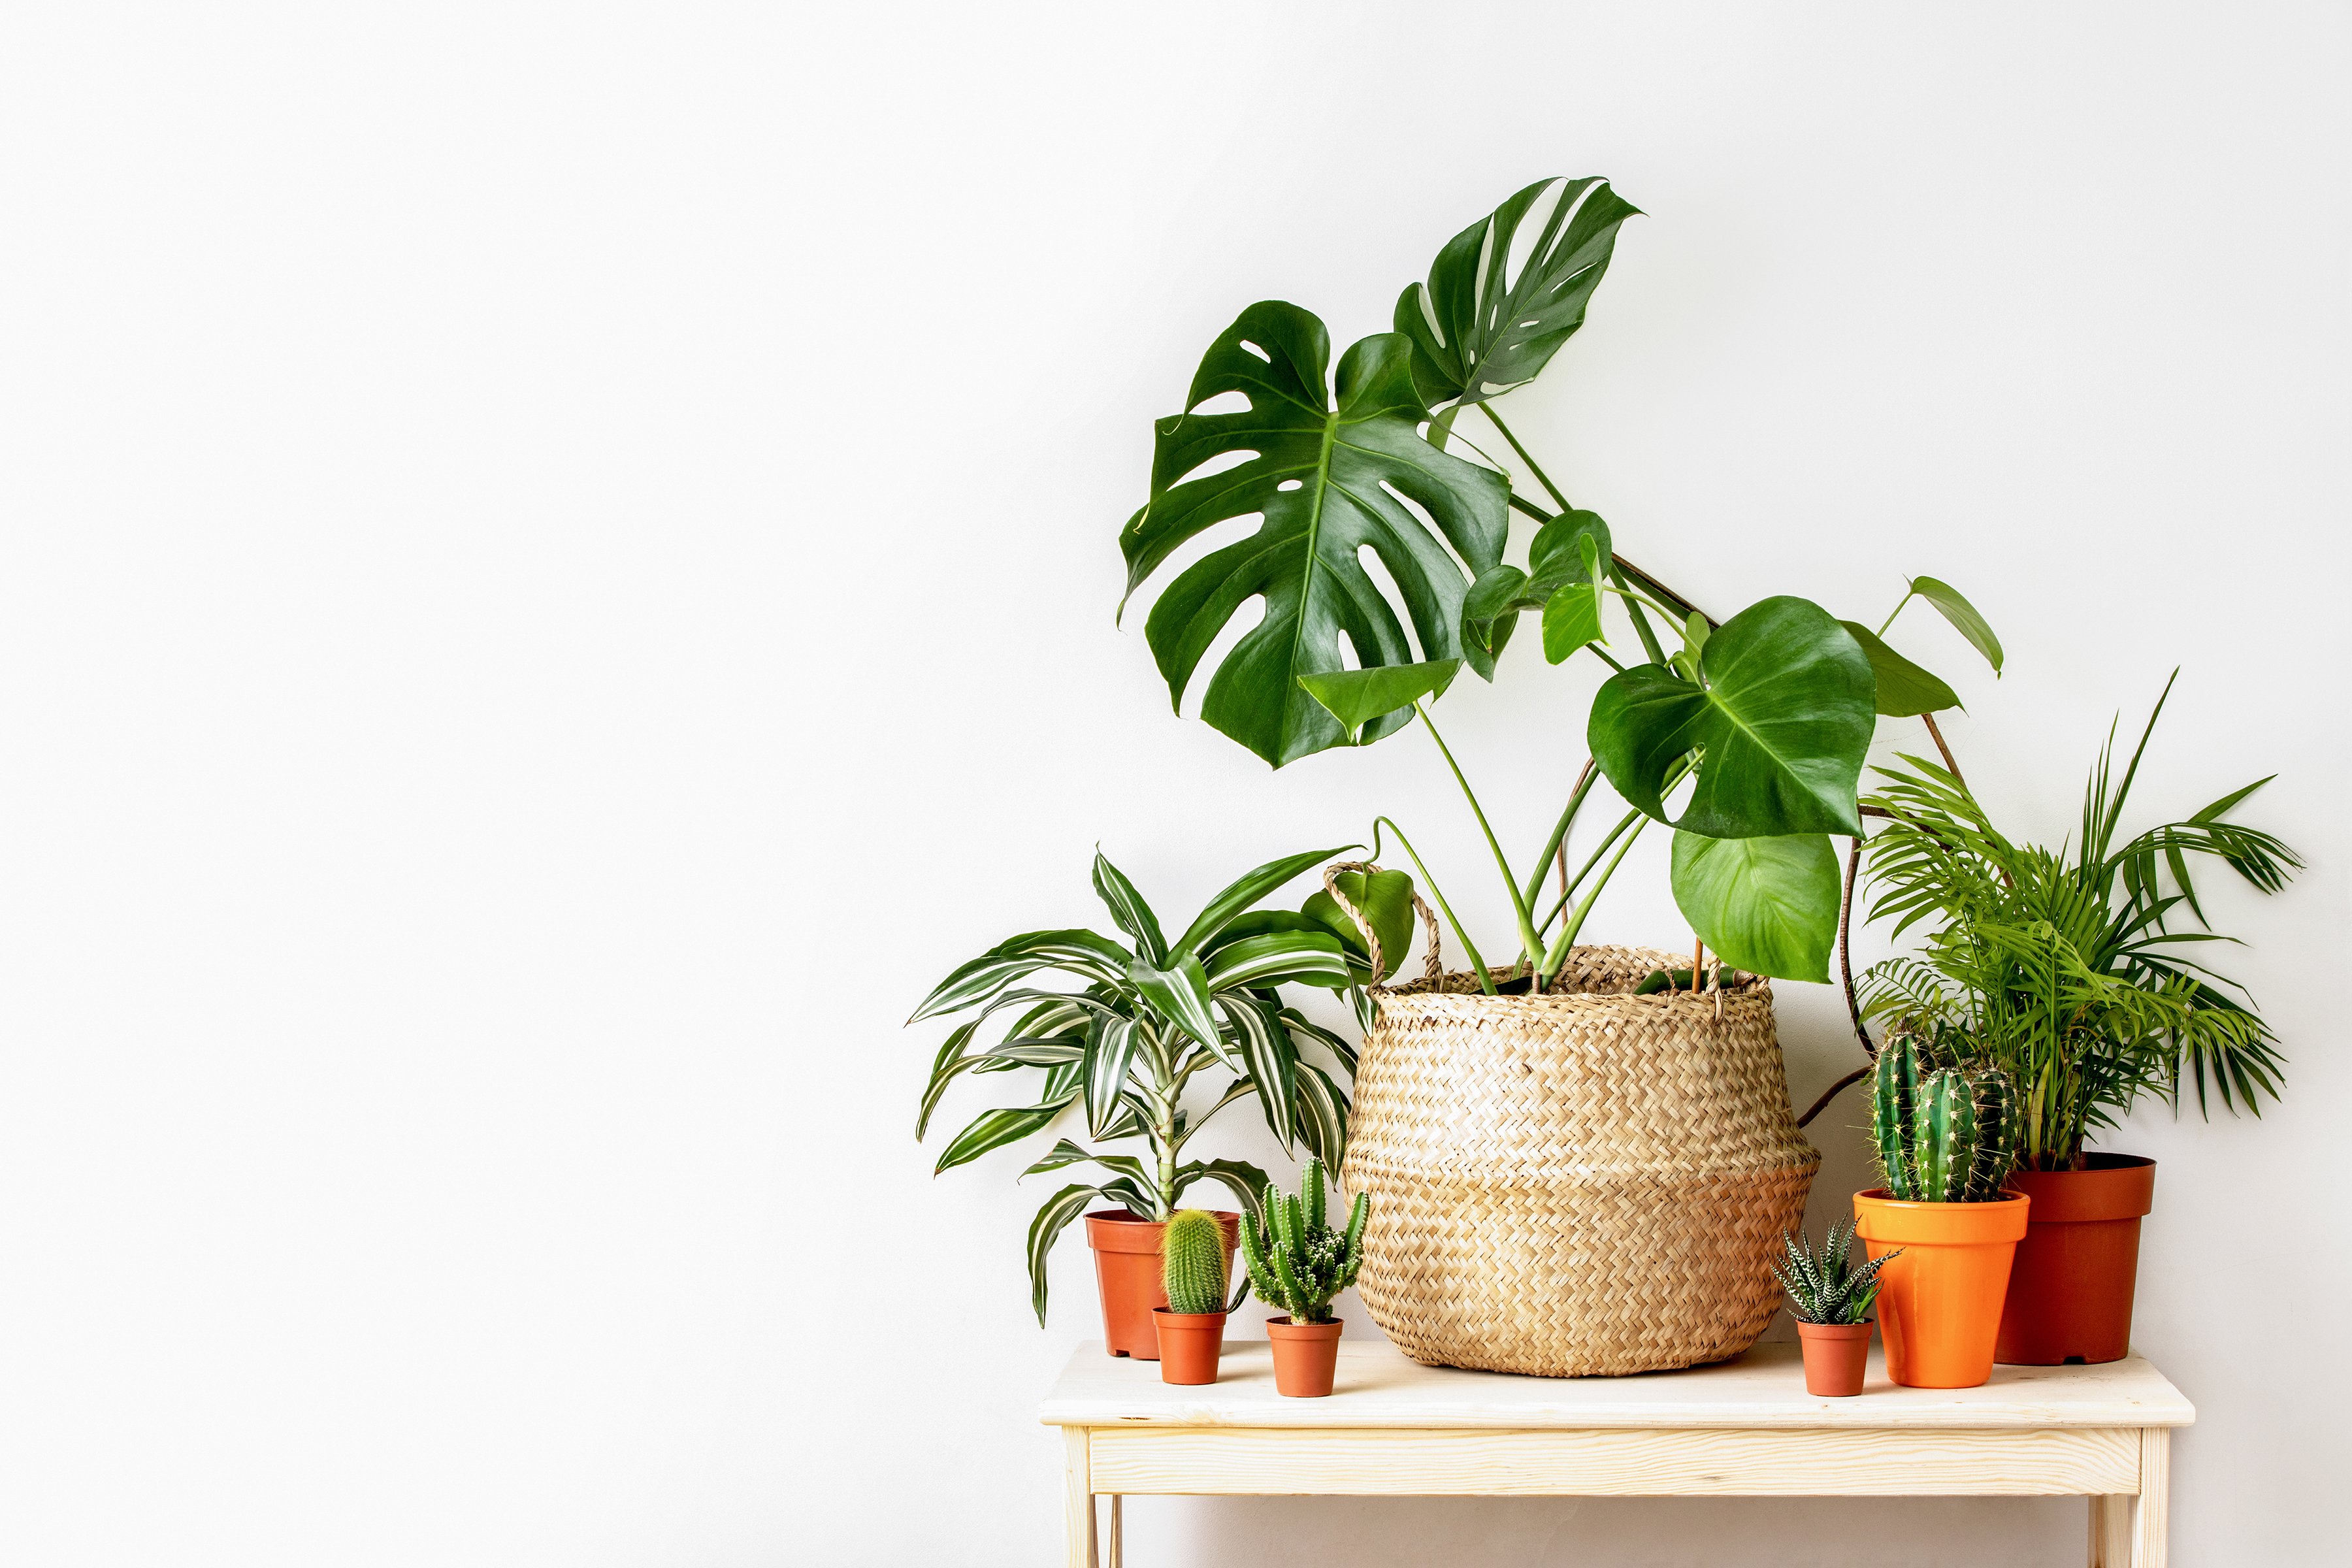 Apartment Plants for Everyone!